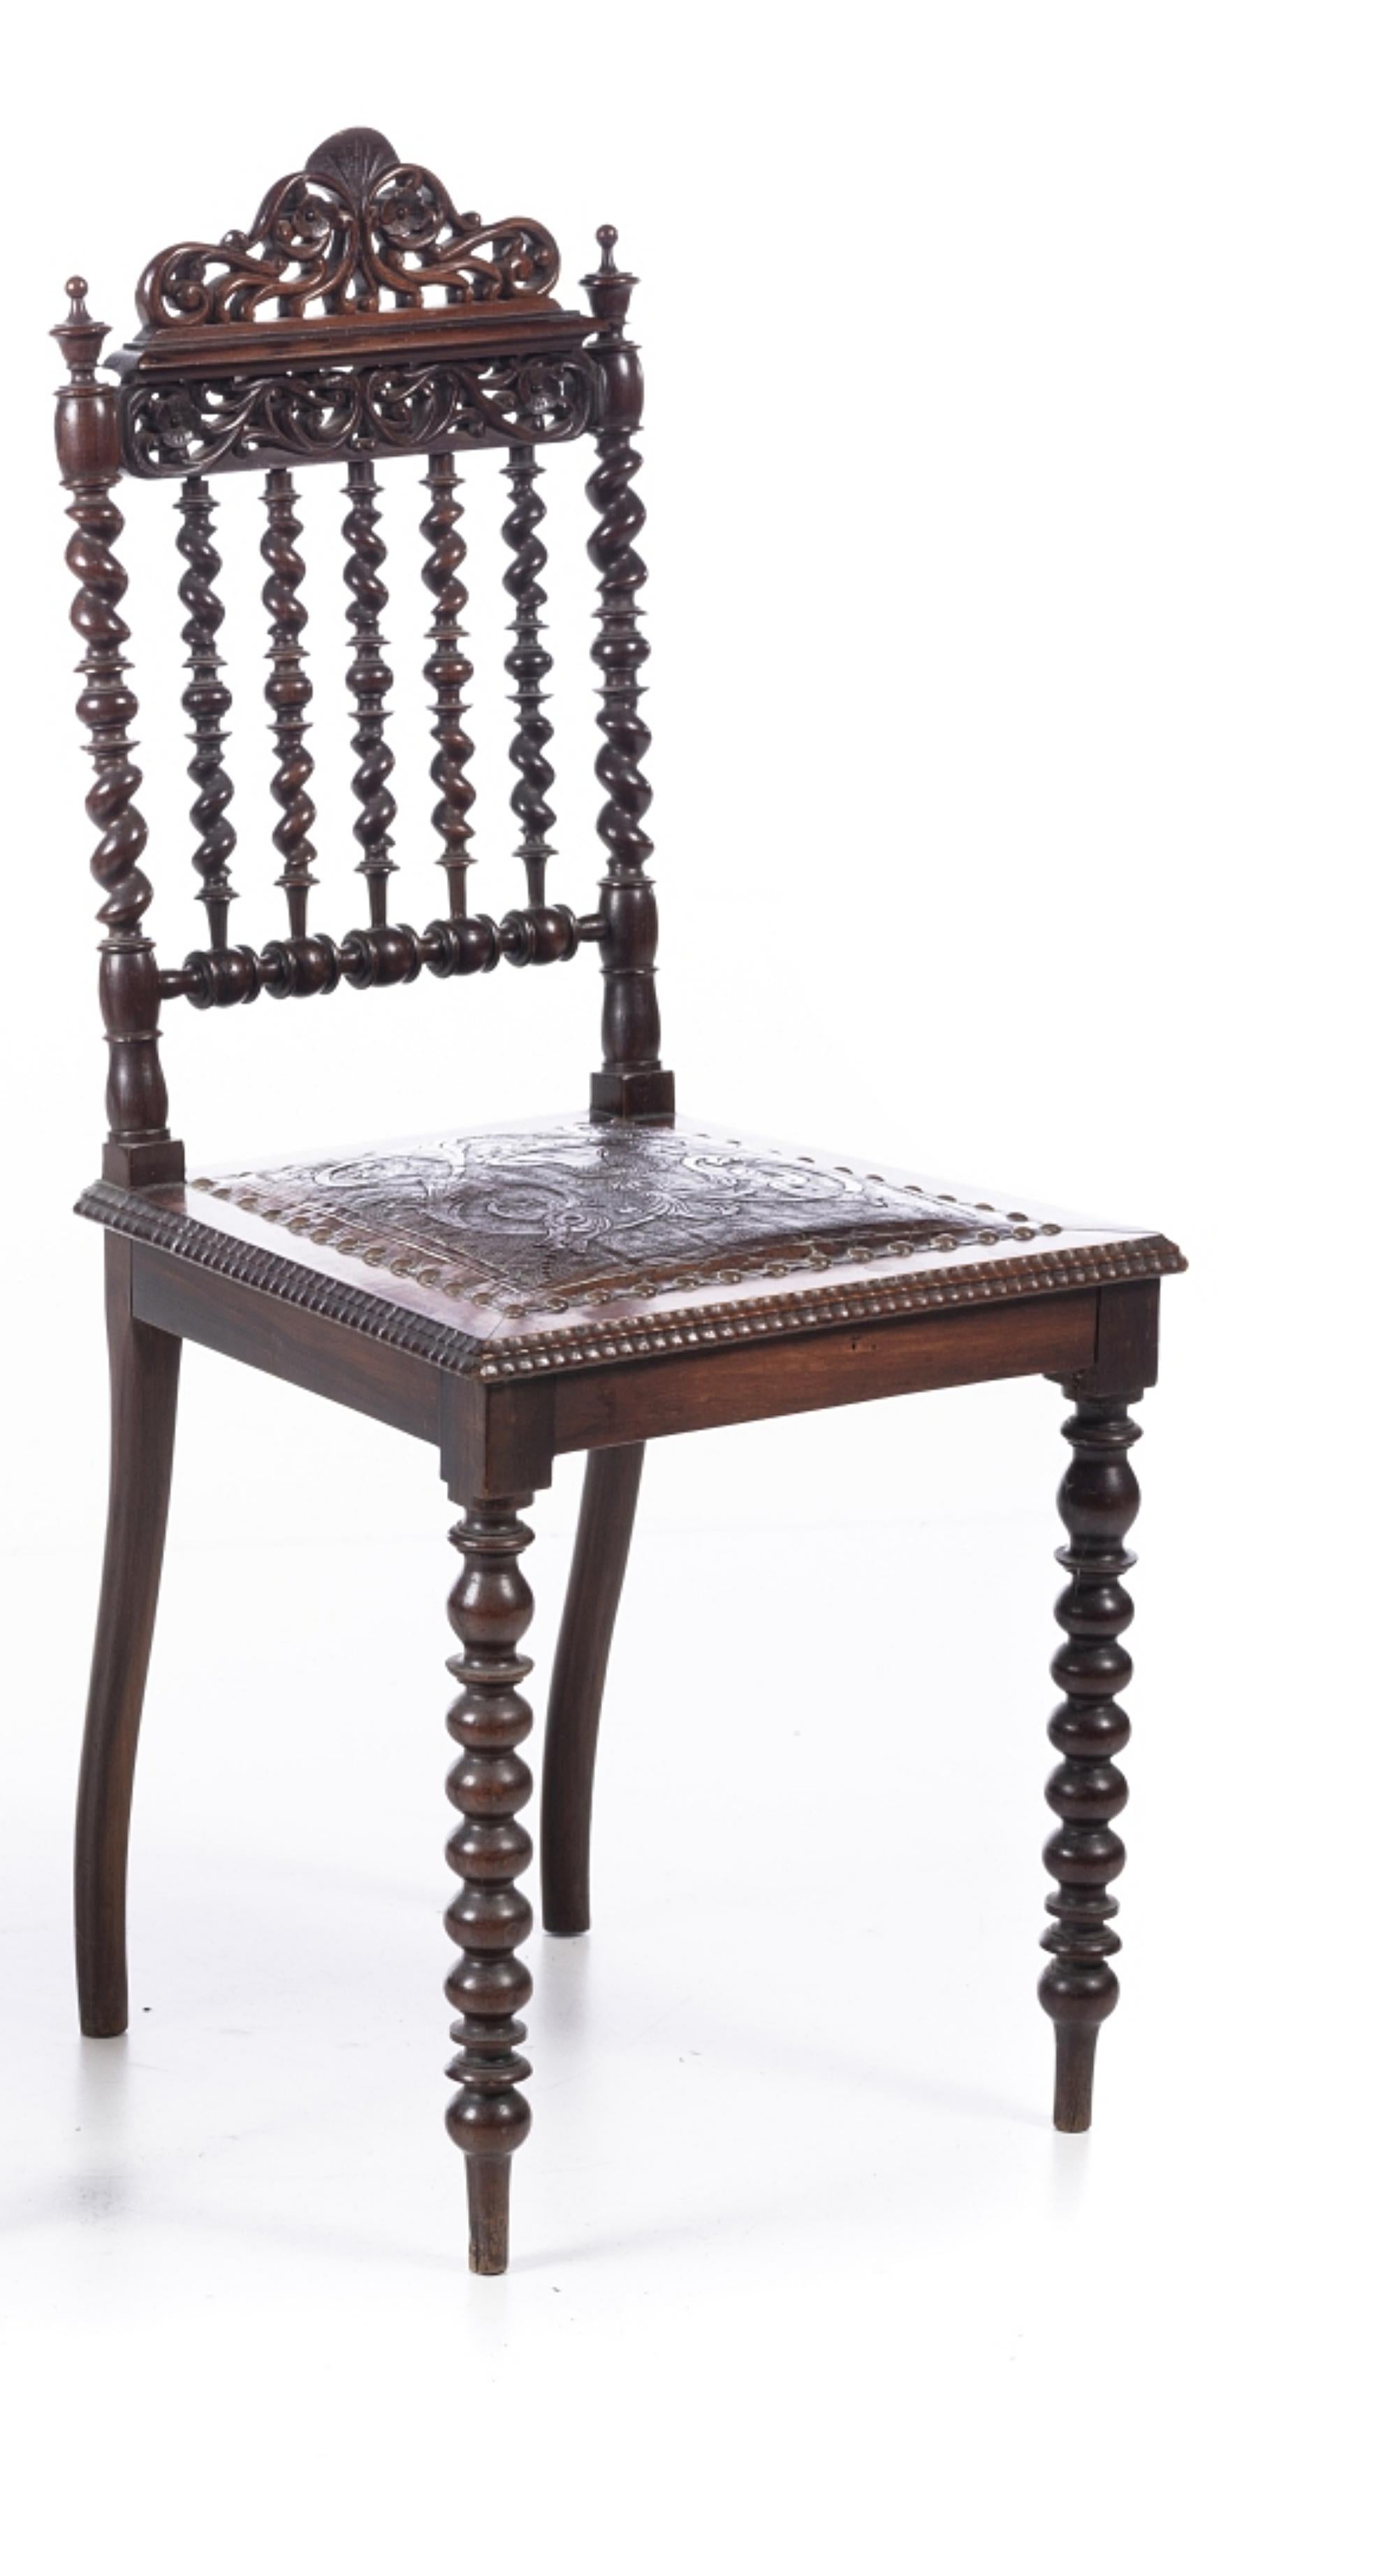 PAIR OF ROMANTIC CHAIRS

19th century Portuguese,
in Brazilian rosewood, twisted and shaken.
Leather seat.
Signs of use.
Dim.: 91 x 40 x 39 cm.
good conditions